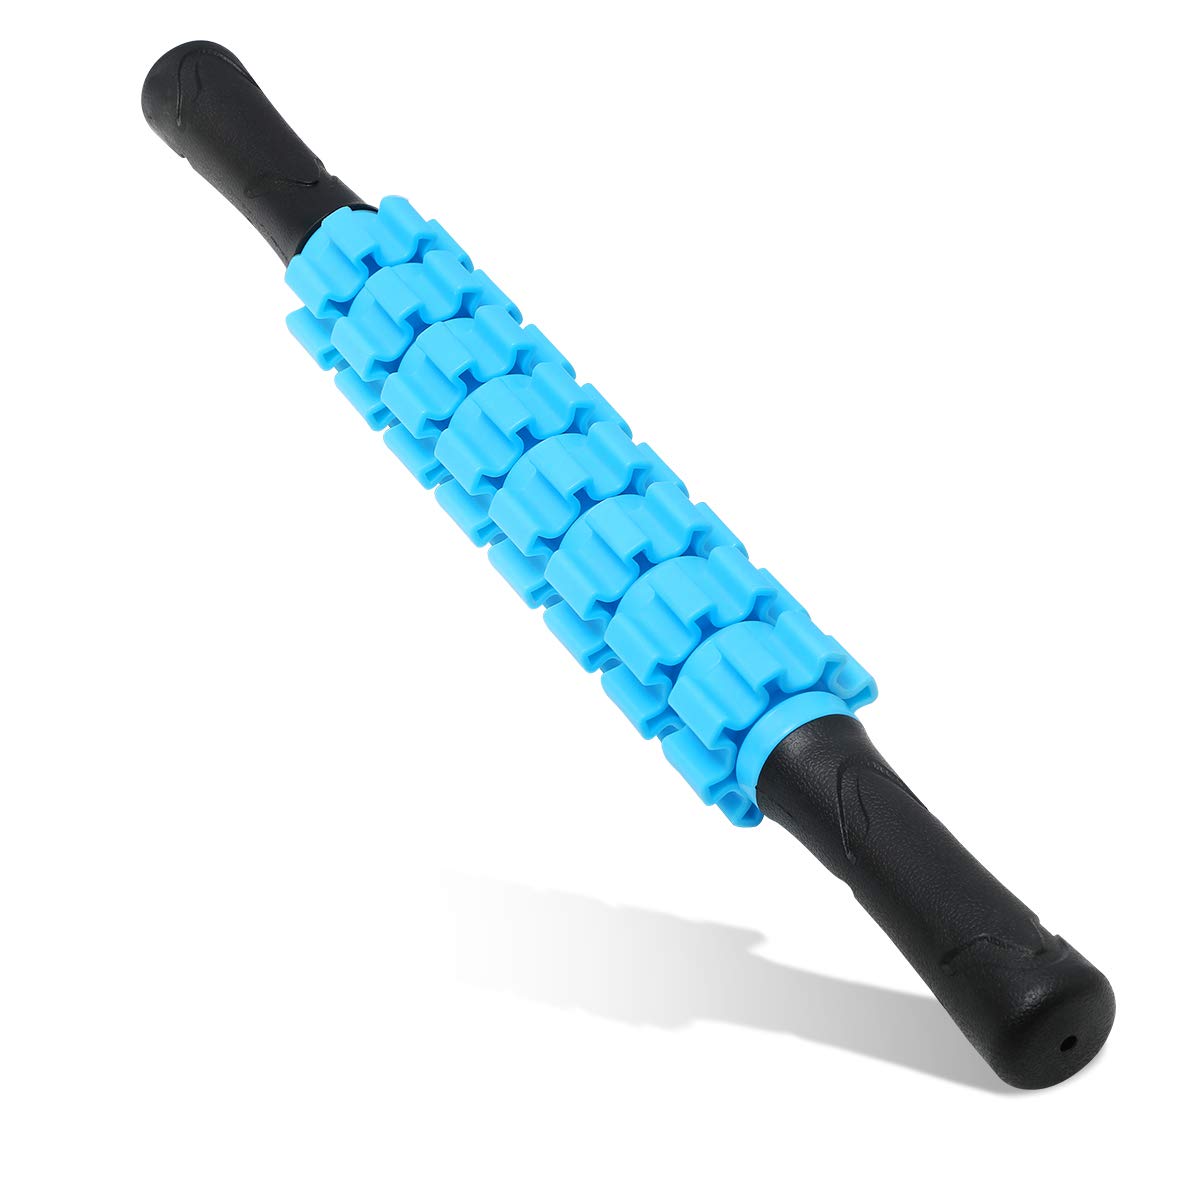 Muscle Roller Stick For Athletes Liposuction Massage Roller For Lymphatic Drainage Therapy